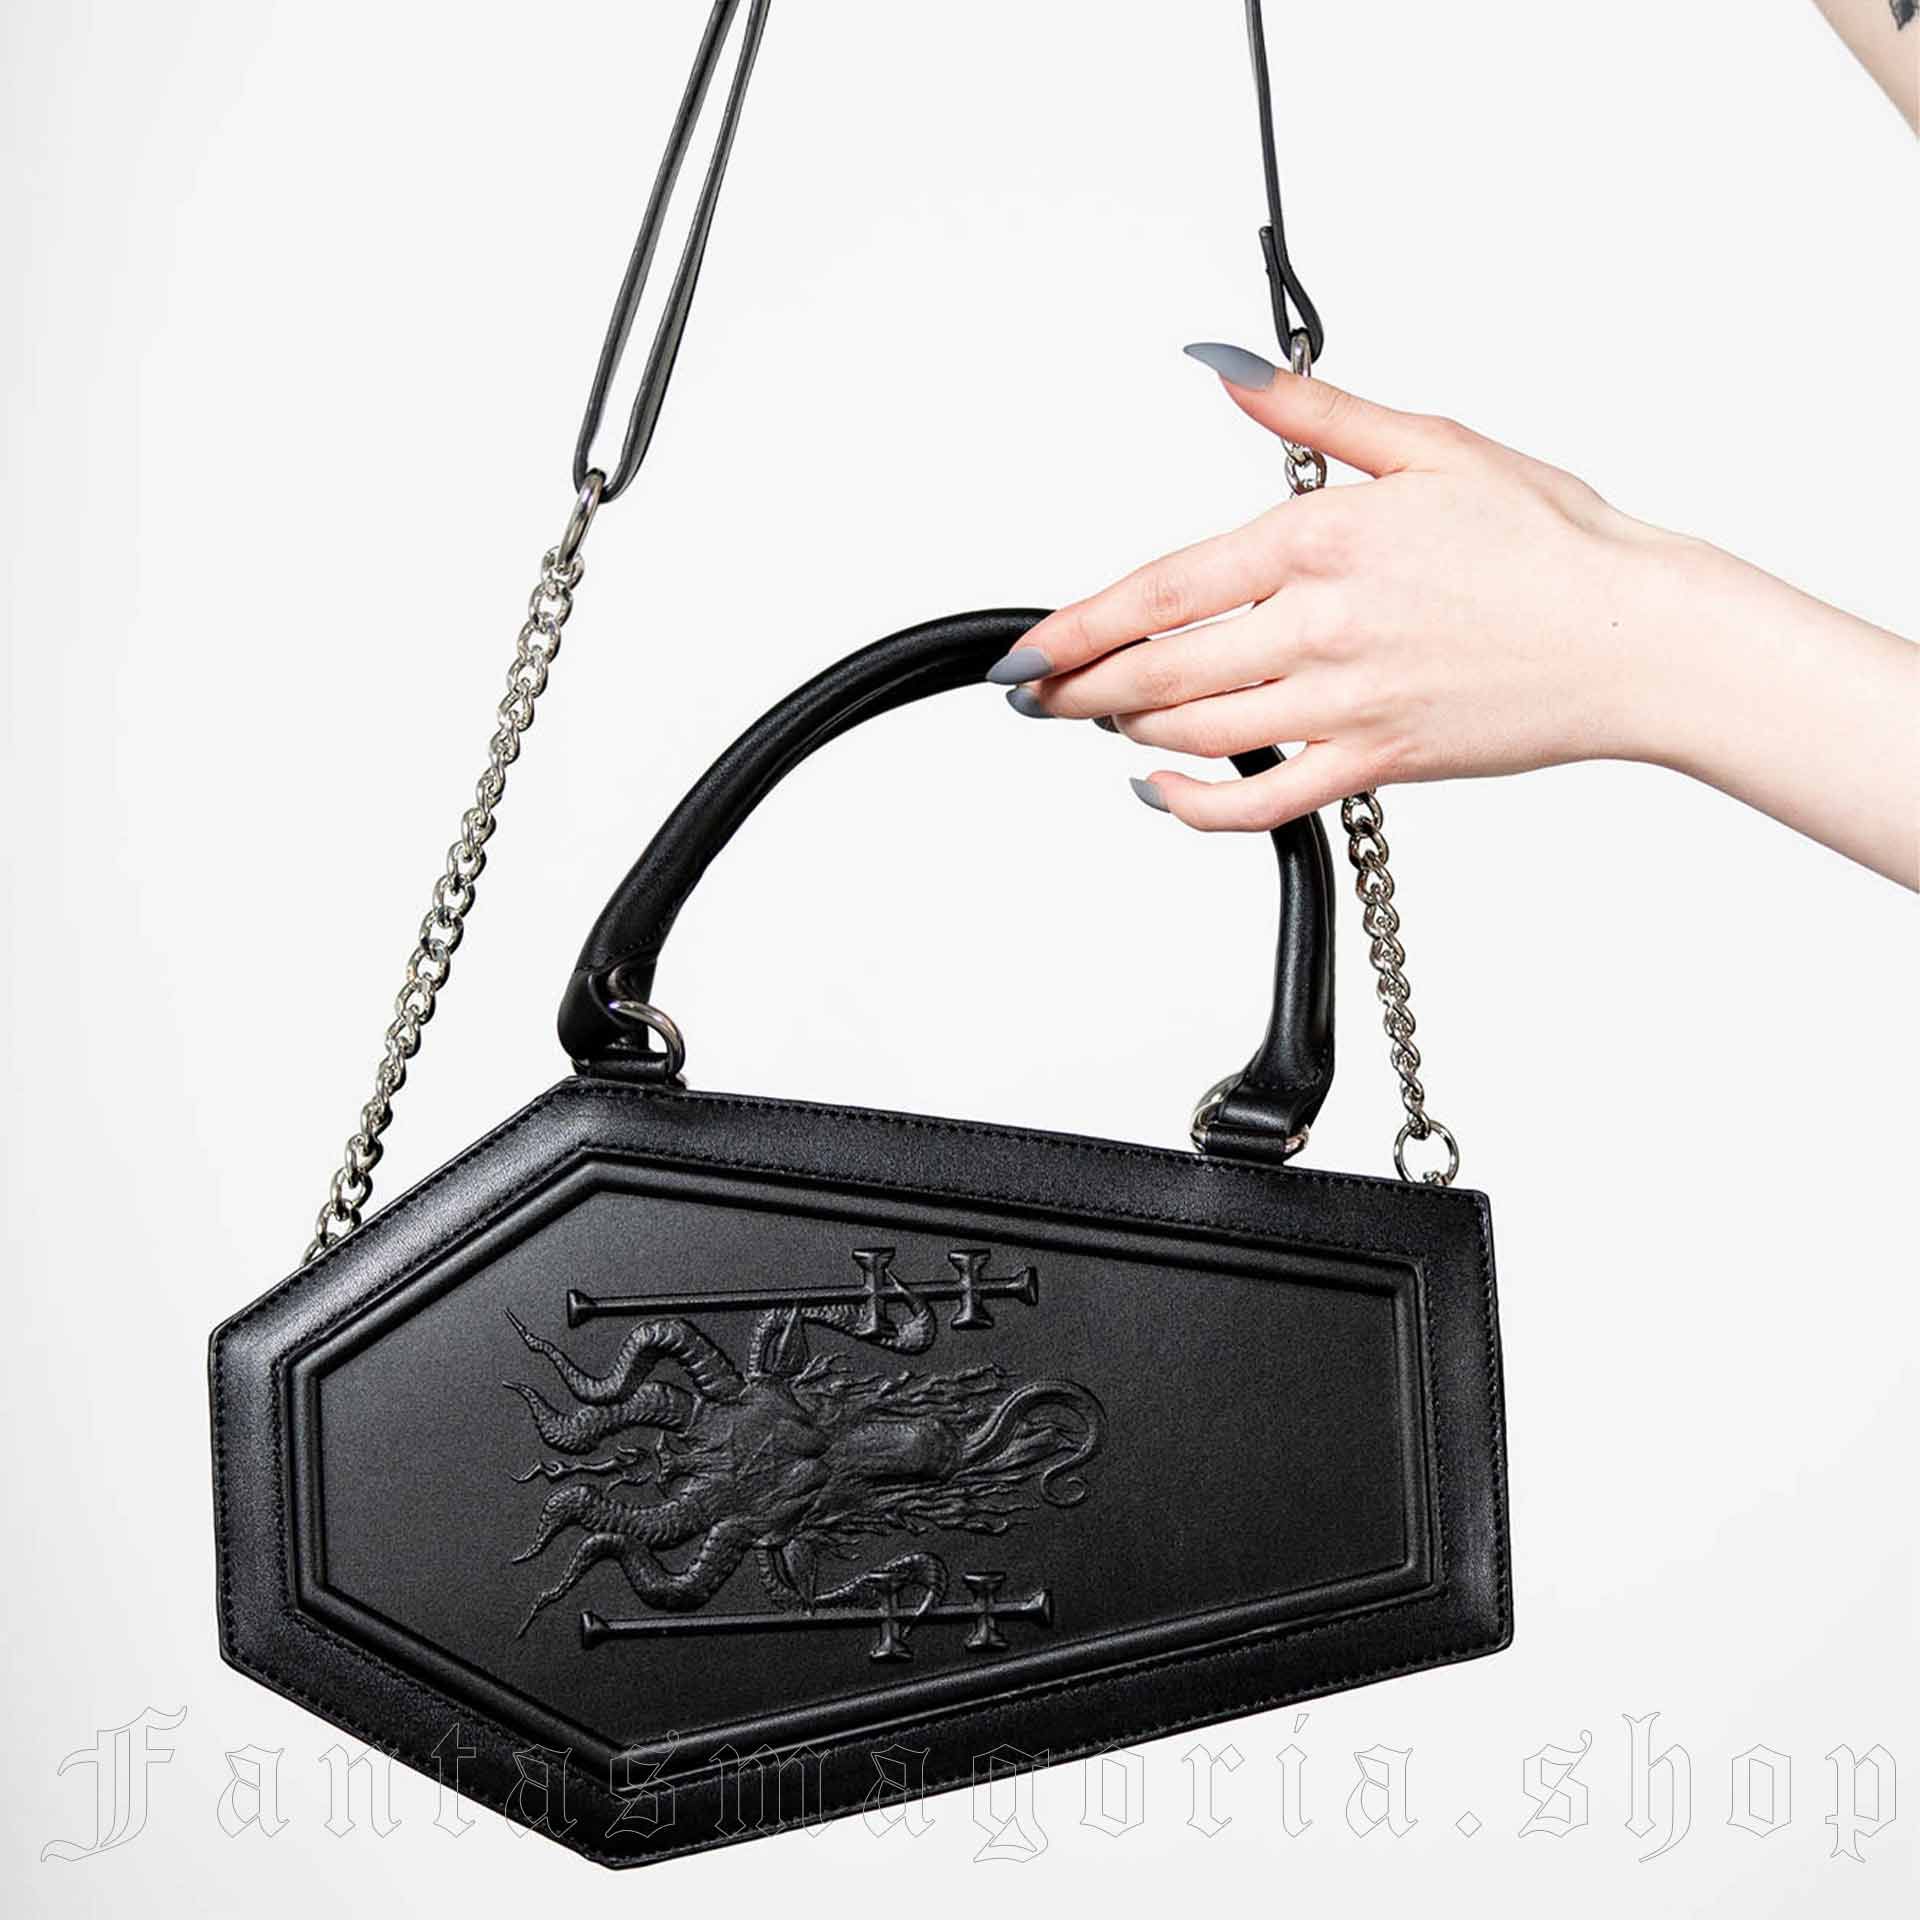 Coffin Bag Cross Body Bag Gothic Removable Strap Messenger Beauty